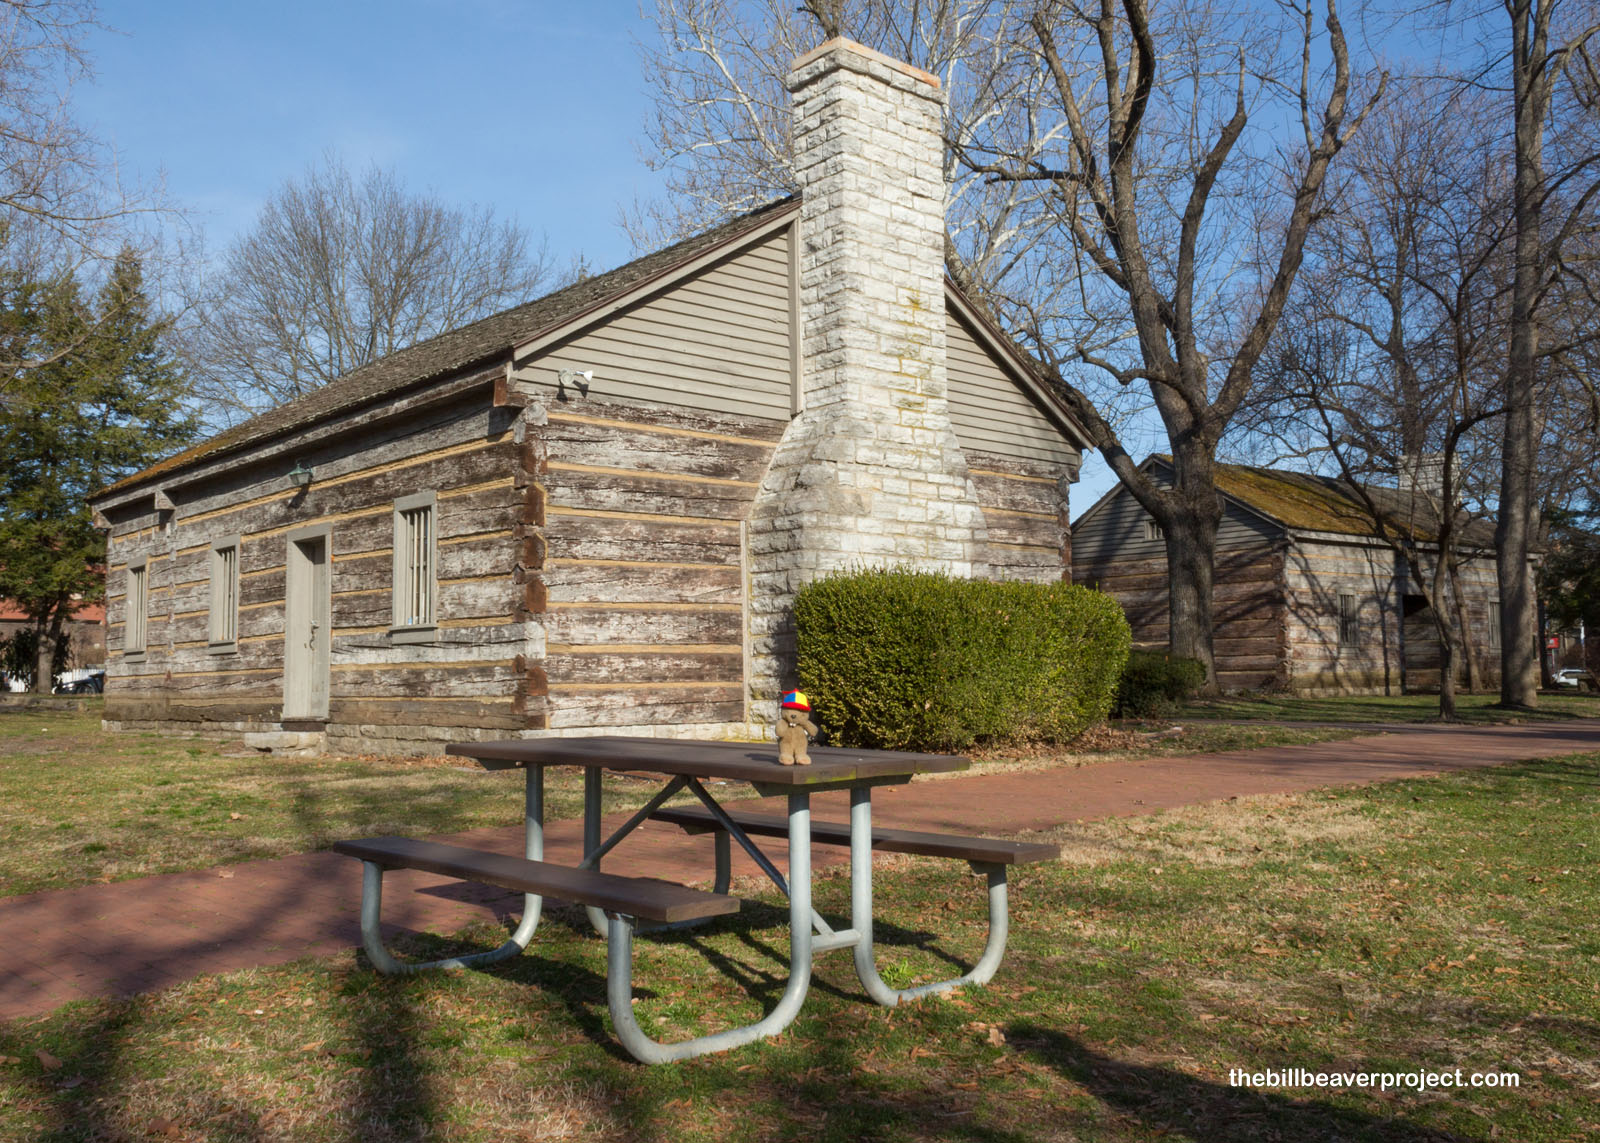 A reconstruction of the Danville meetinghouse!